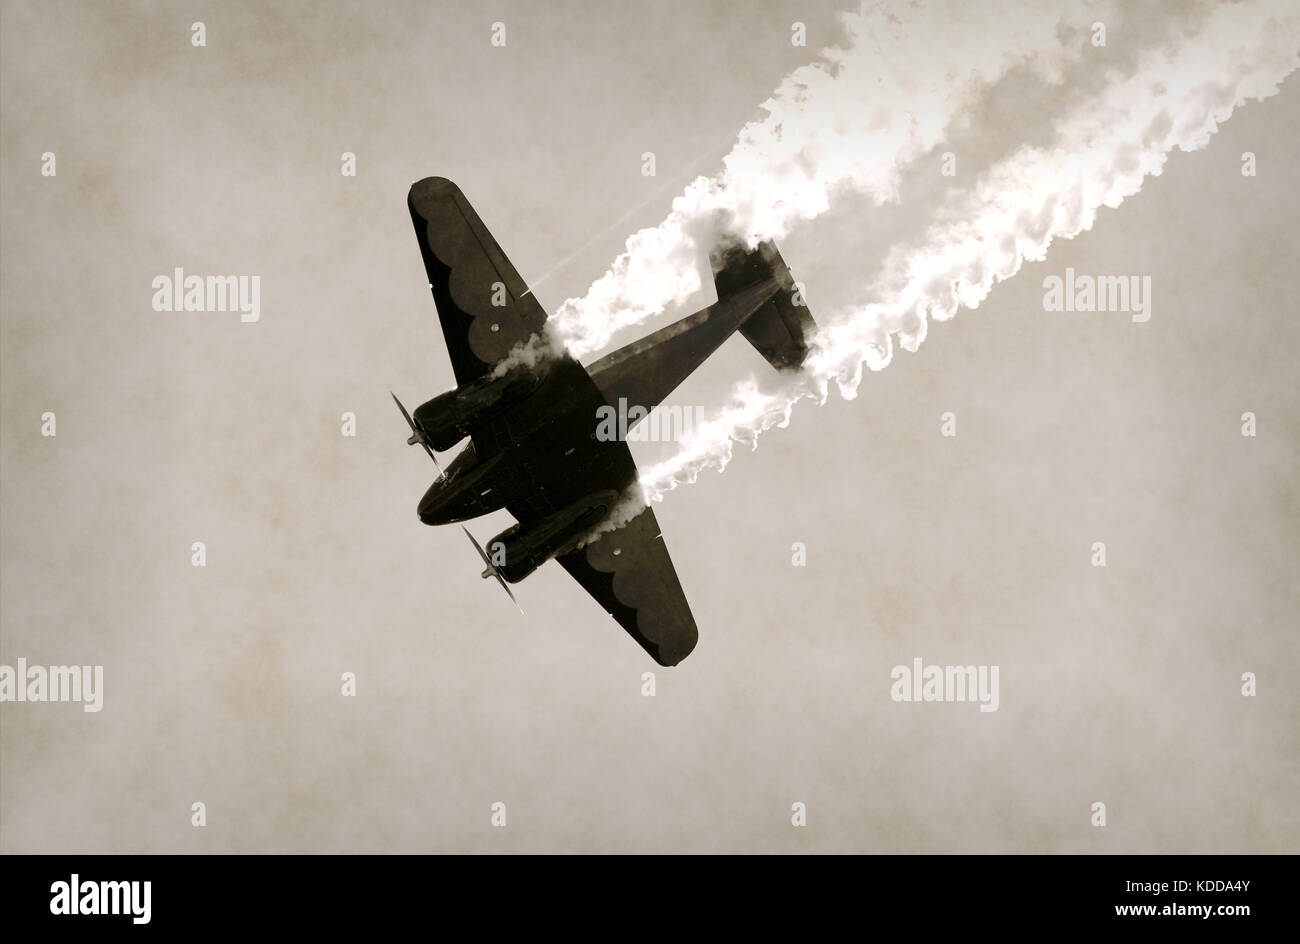 World War II era propeller airplane diving with a trail of smoke Stock Photo